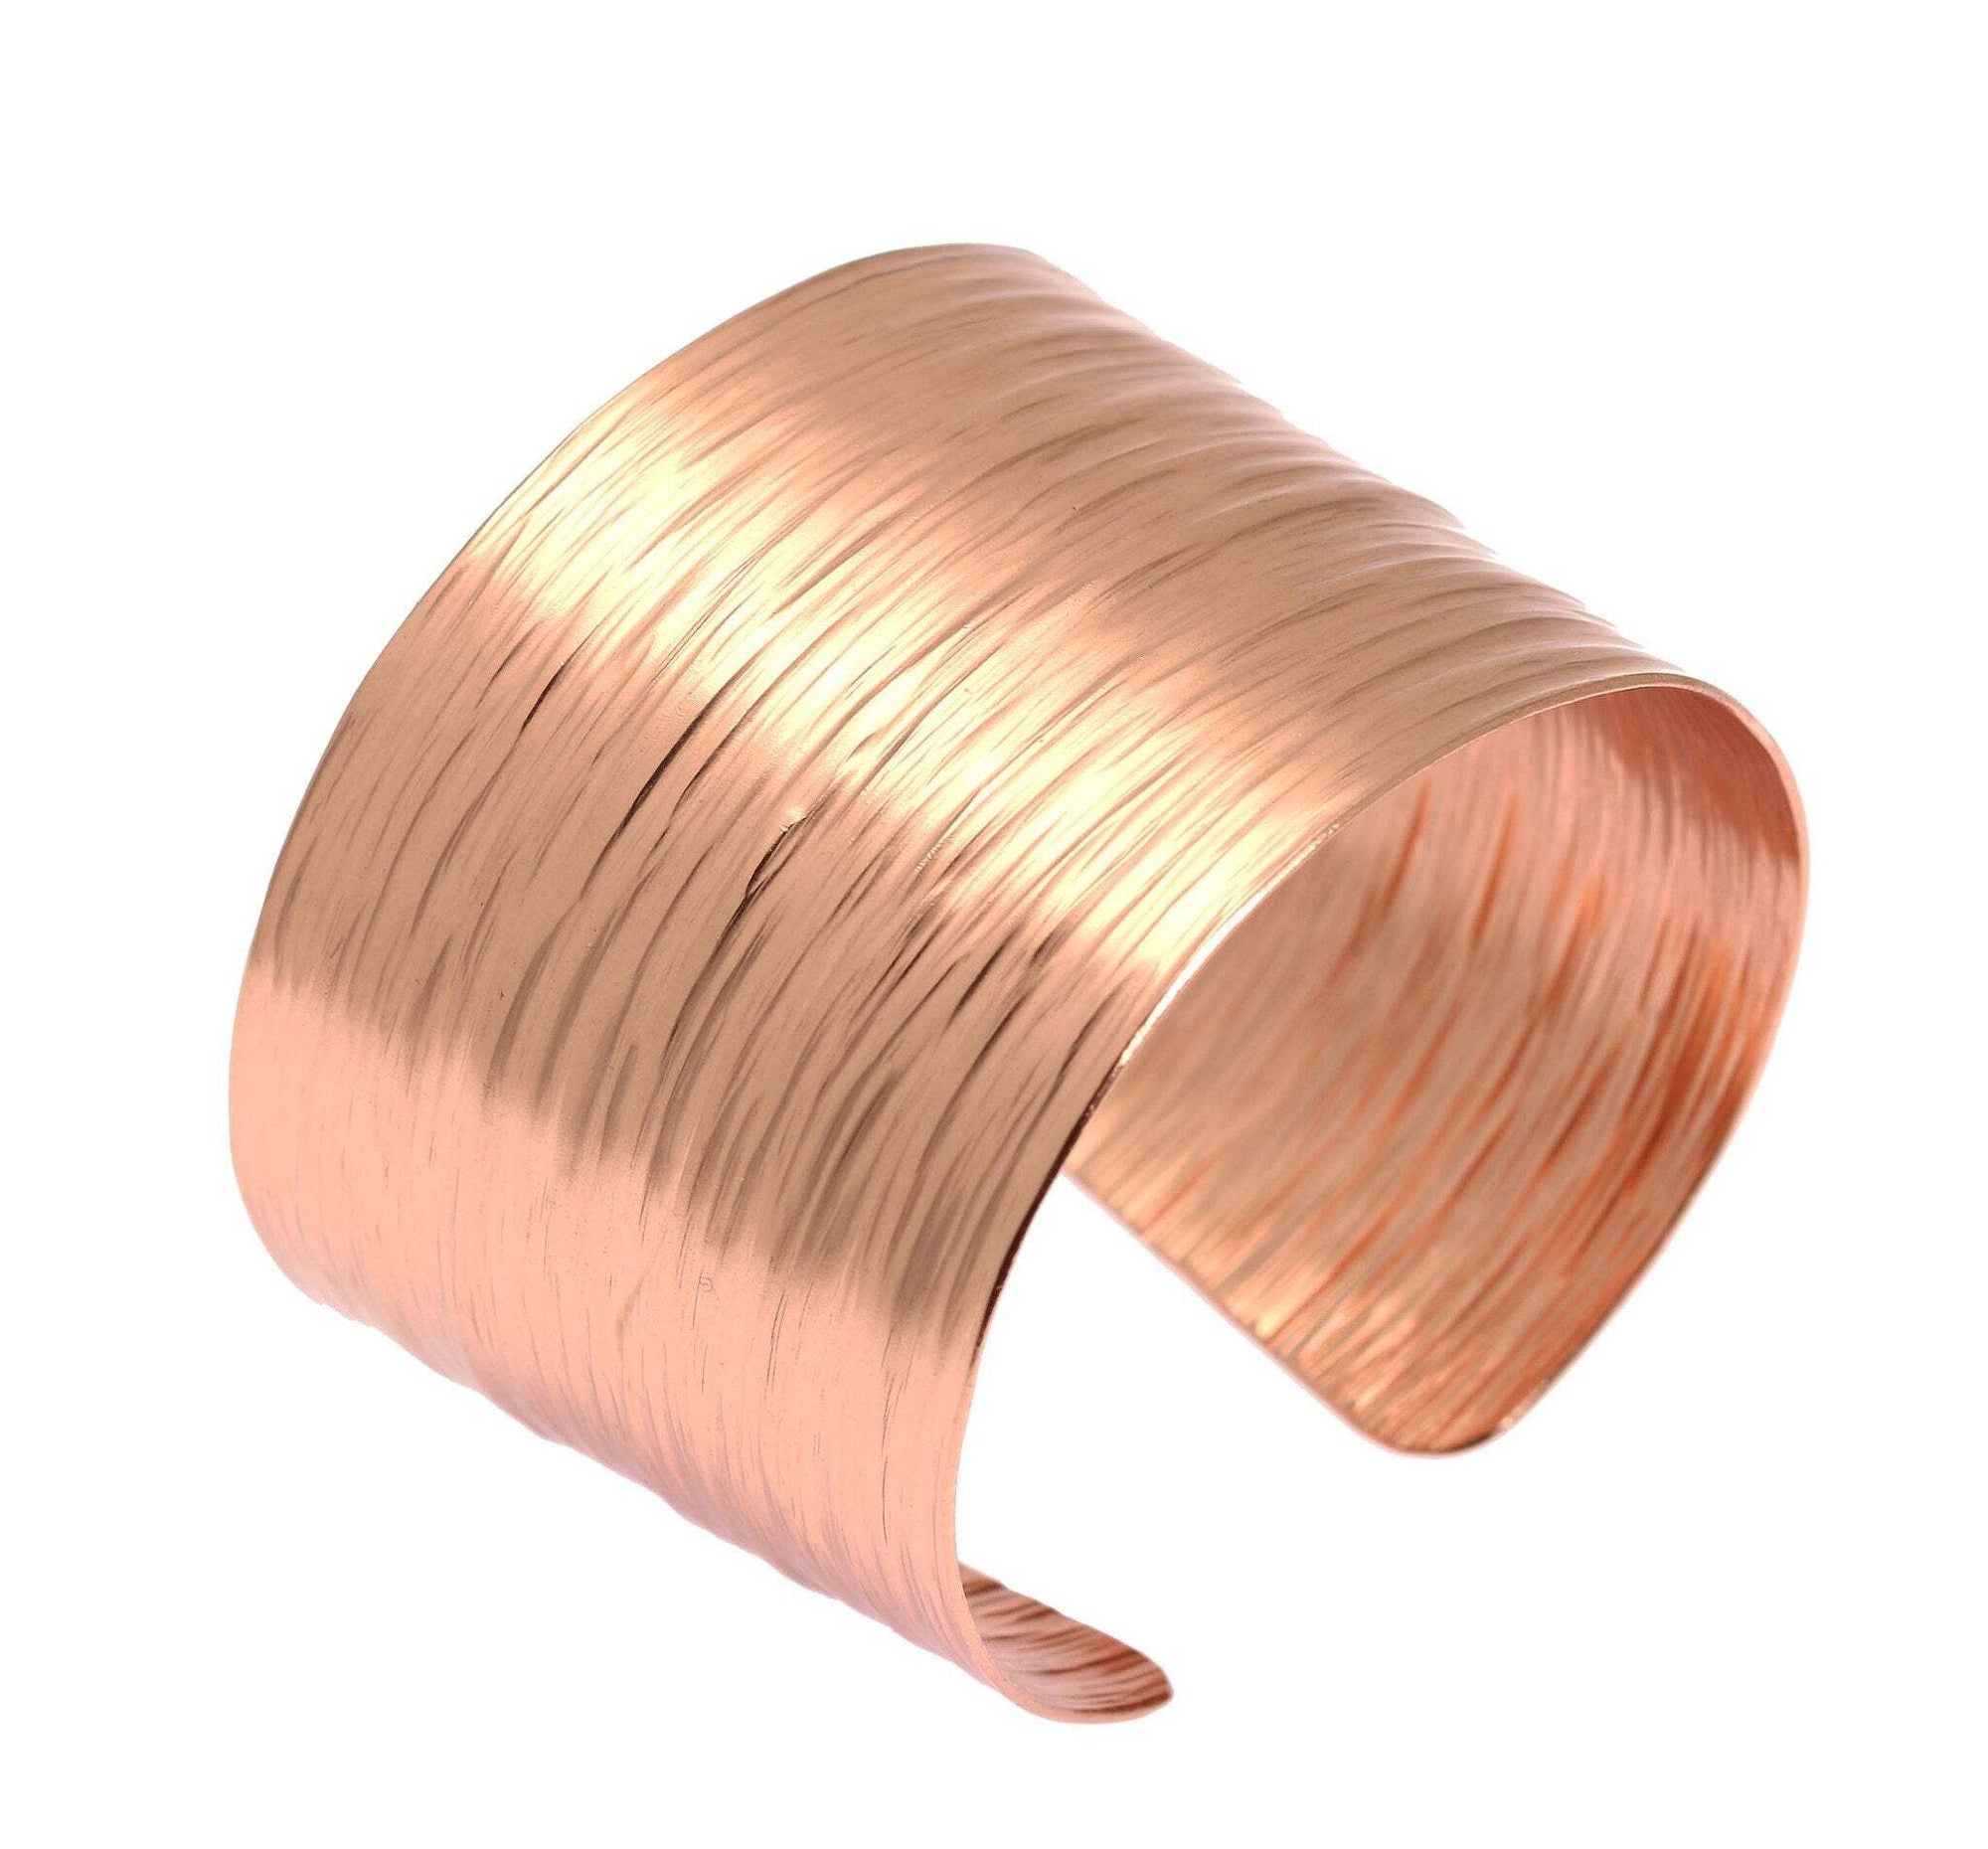 Handcrafted Copper Bracelets